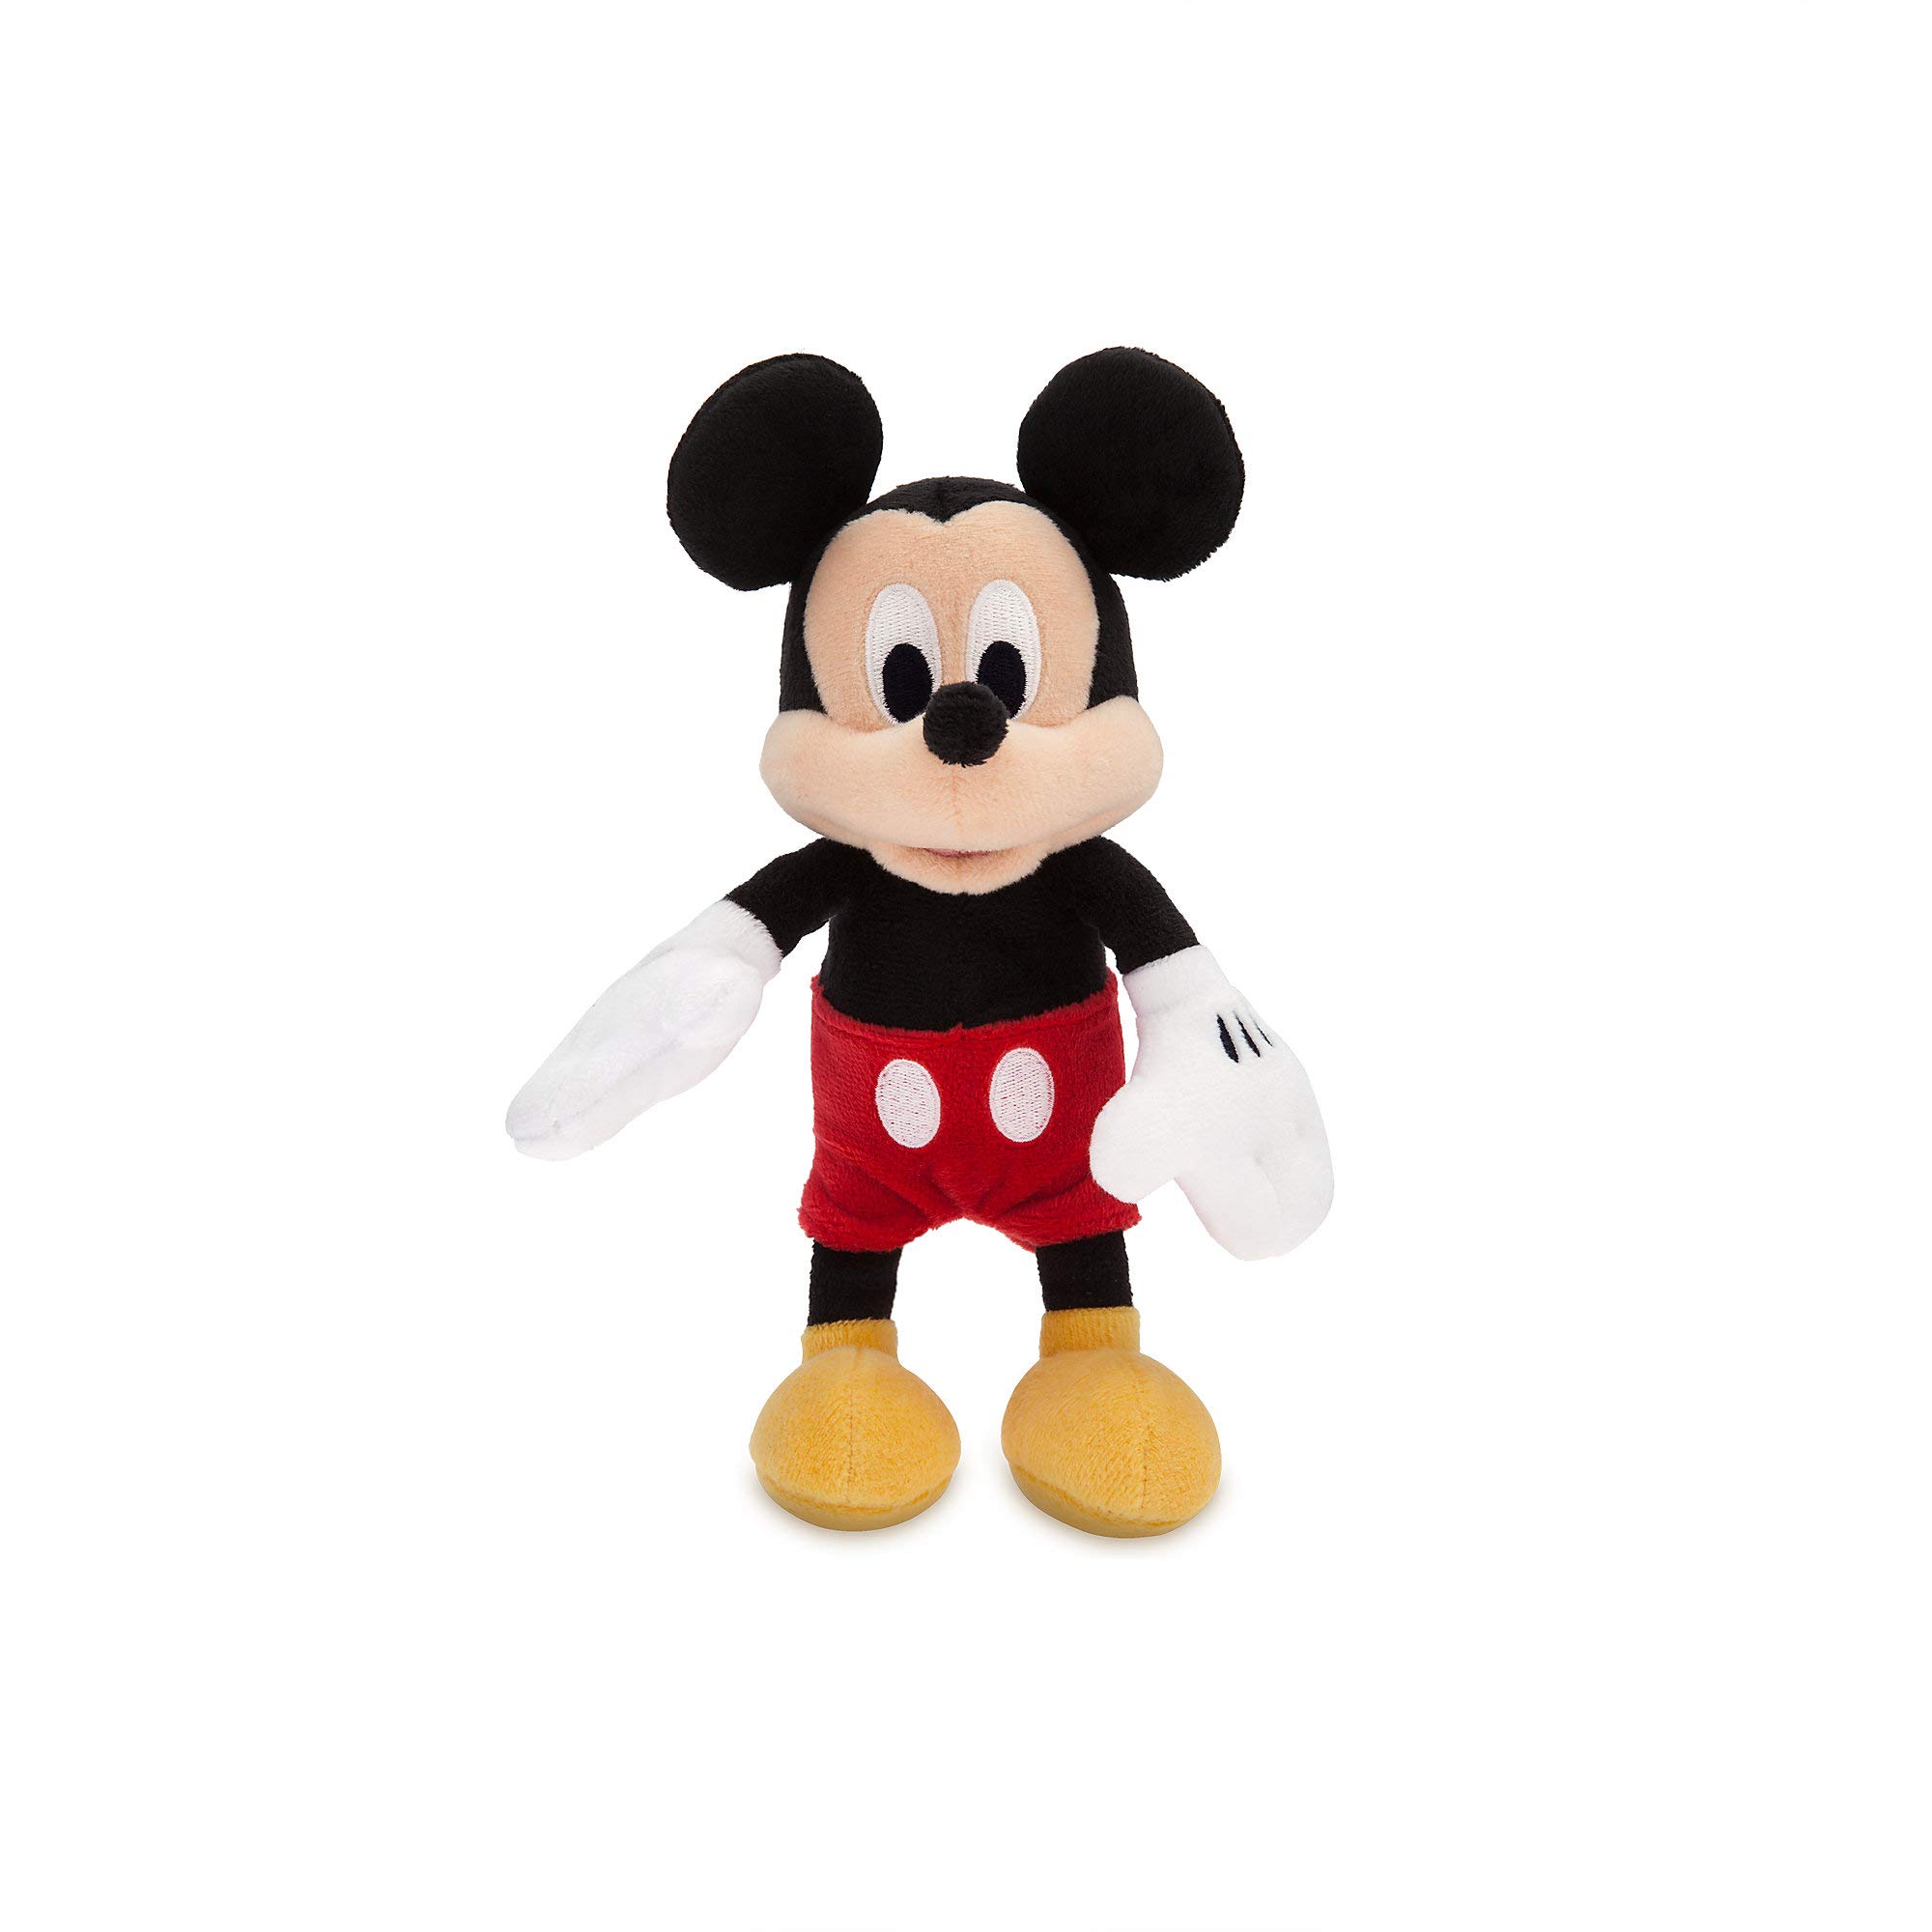 Disney Mickey Mouse Plush - Mini Bean Bag - 9 Inches, Mickey and Friends, Iconic Cuddly Character with Classic Embroidered Features, Suitable for All Ages 0+ Toy Figure